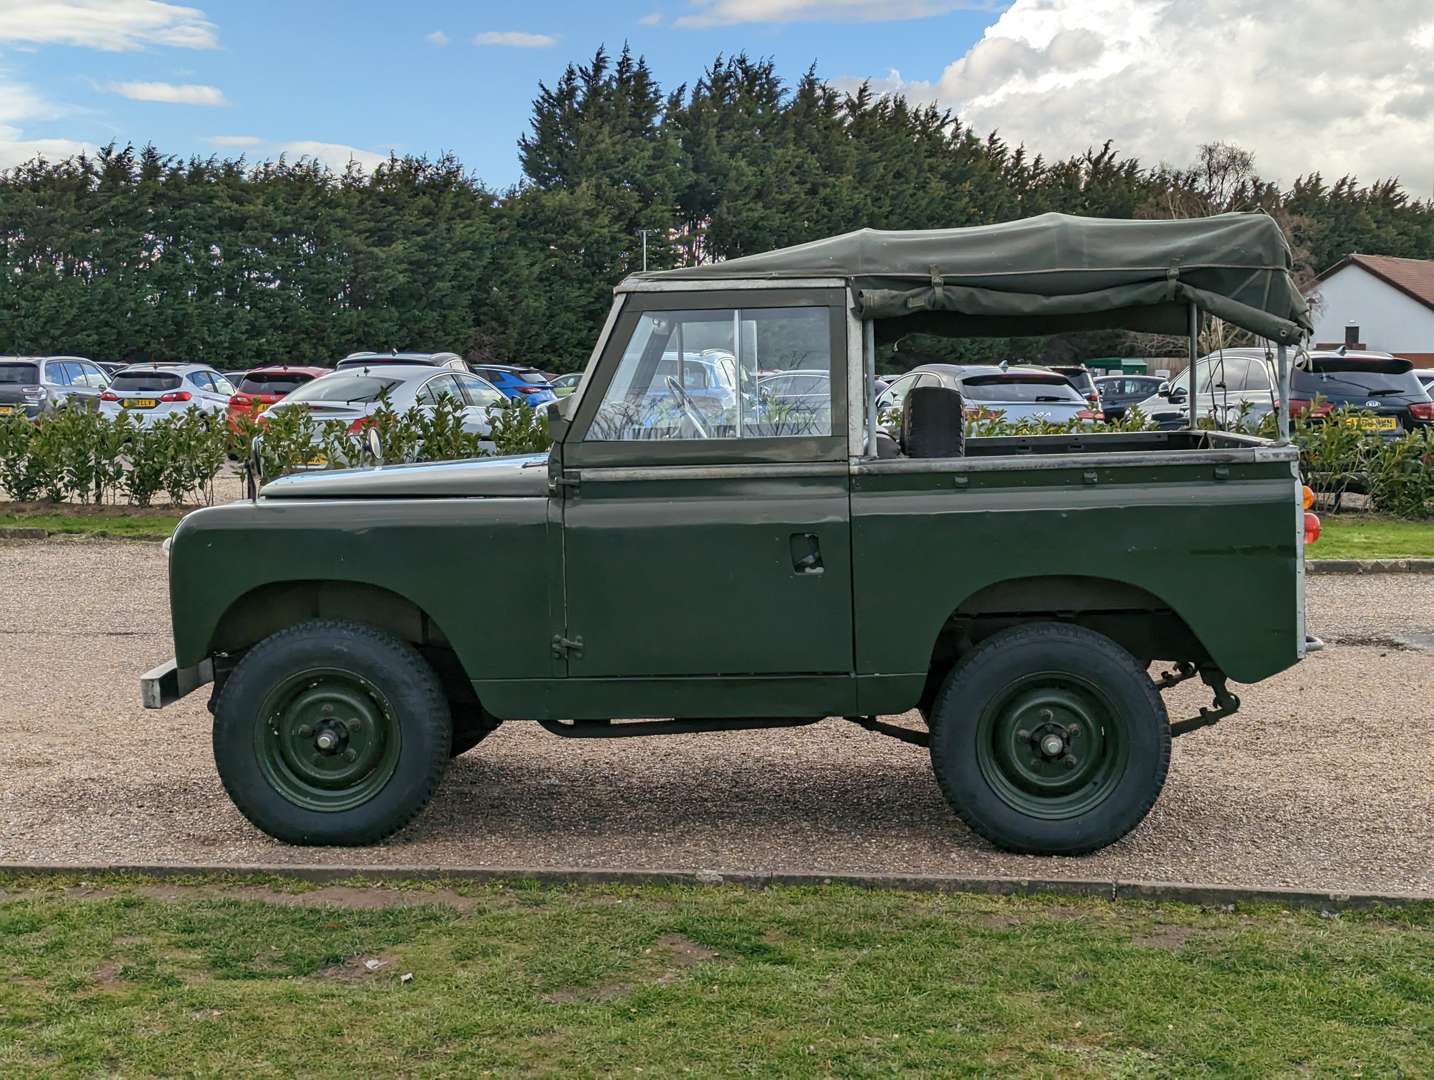 1958 LAND ROVER SWB SERIES II - Image 4 of 26